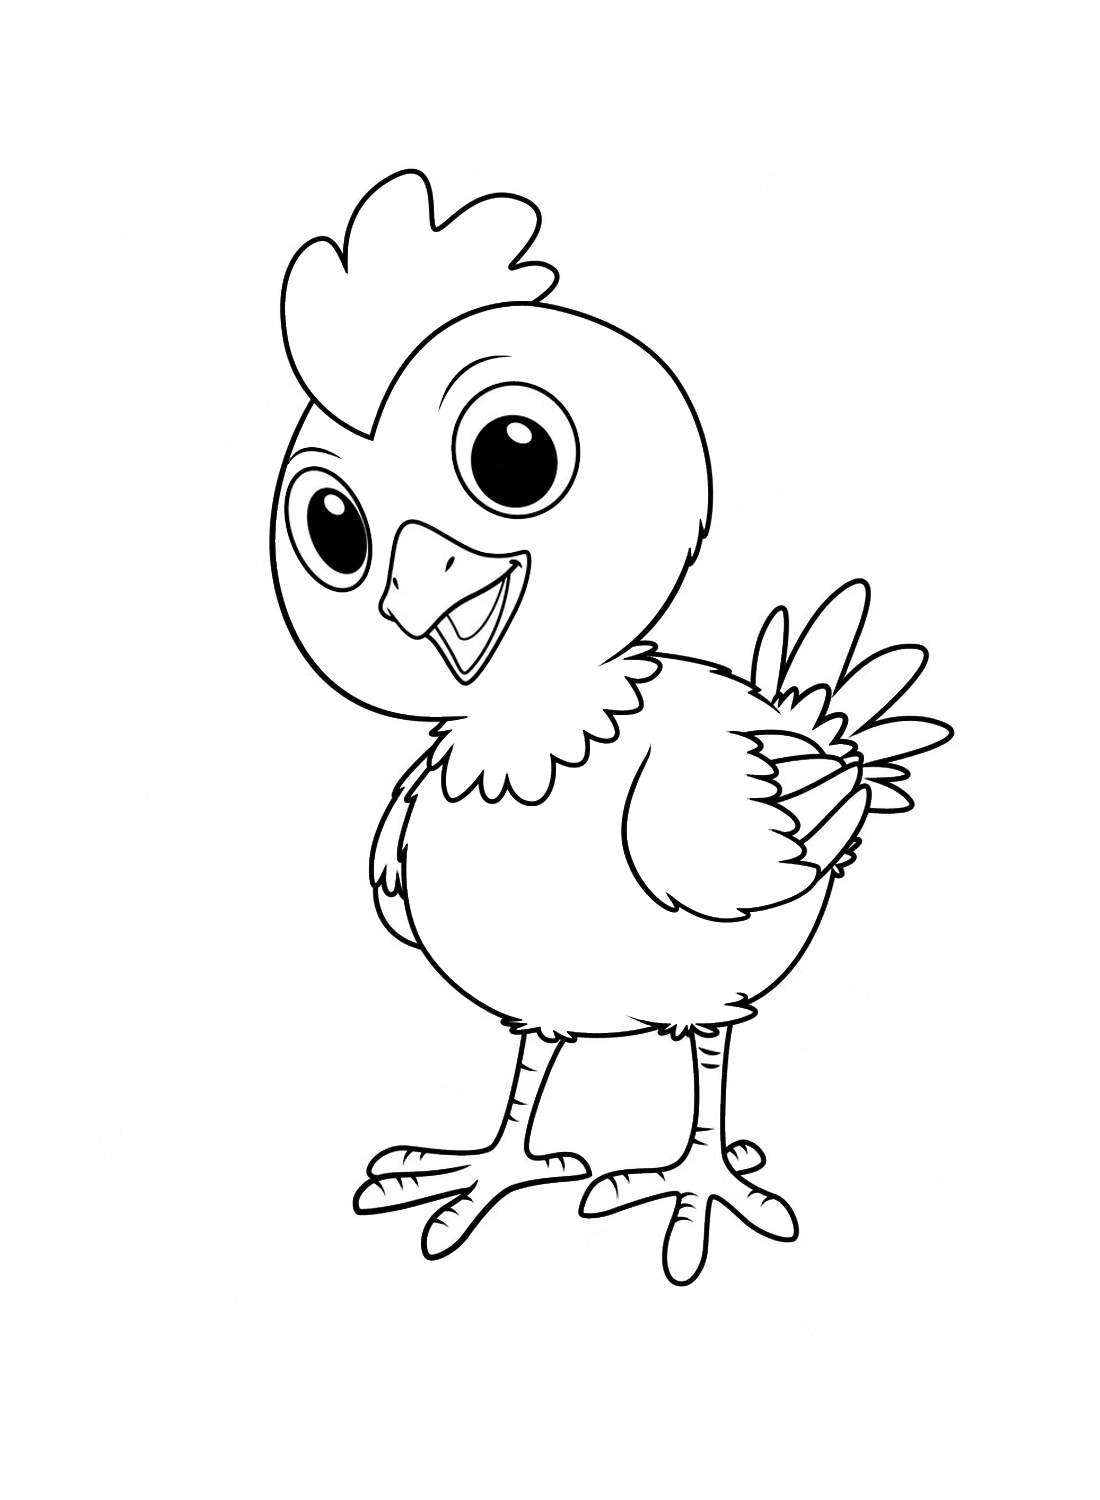 Happy chick Coloring Pages